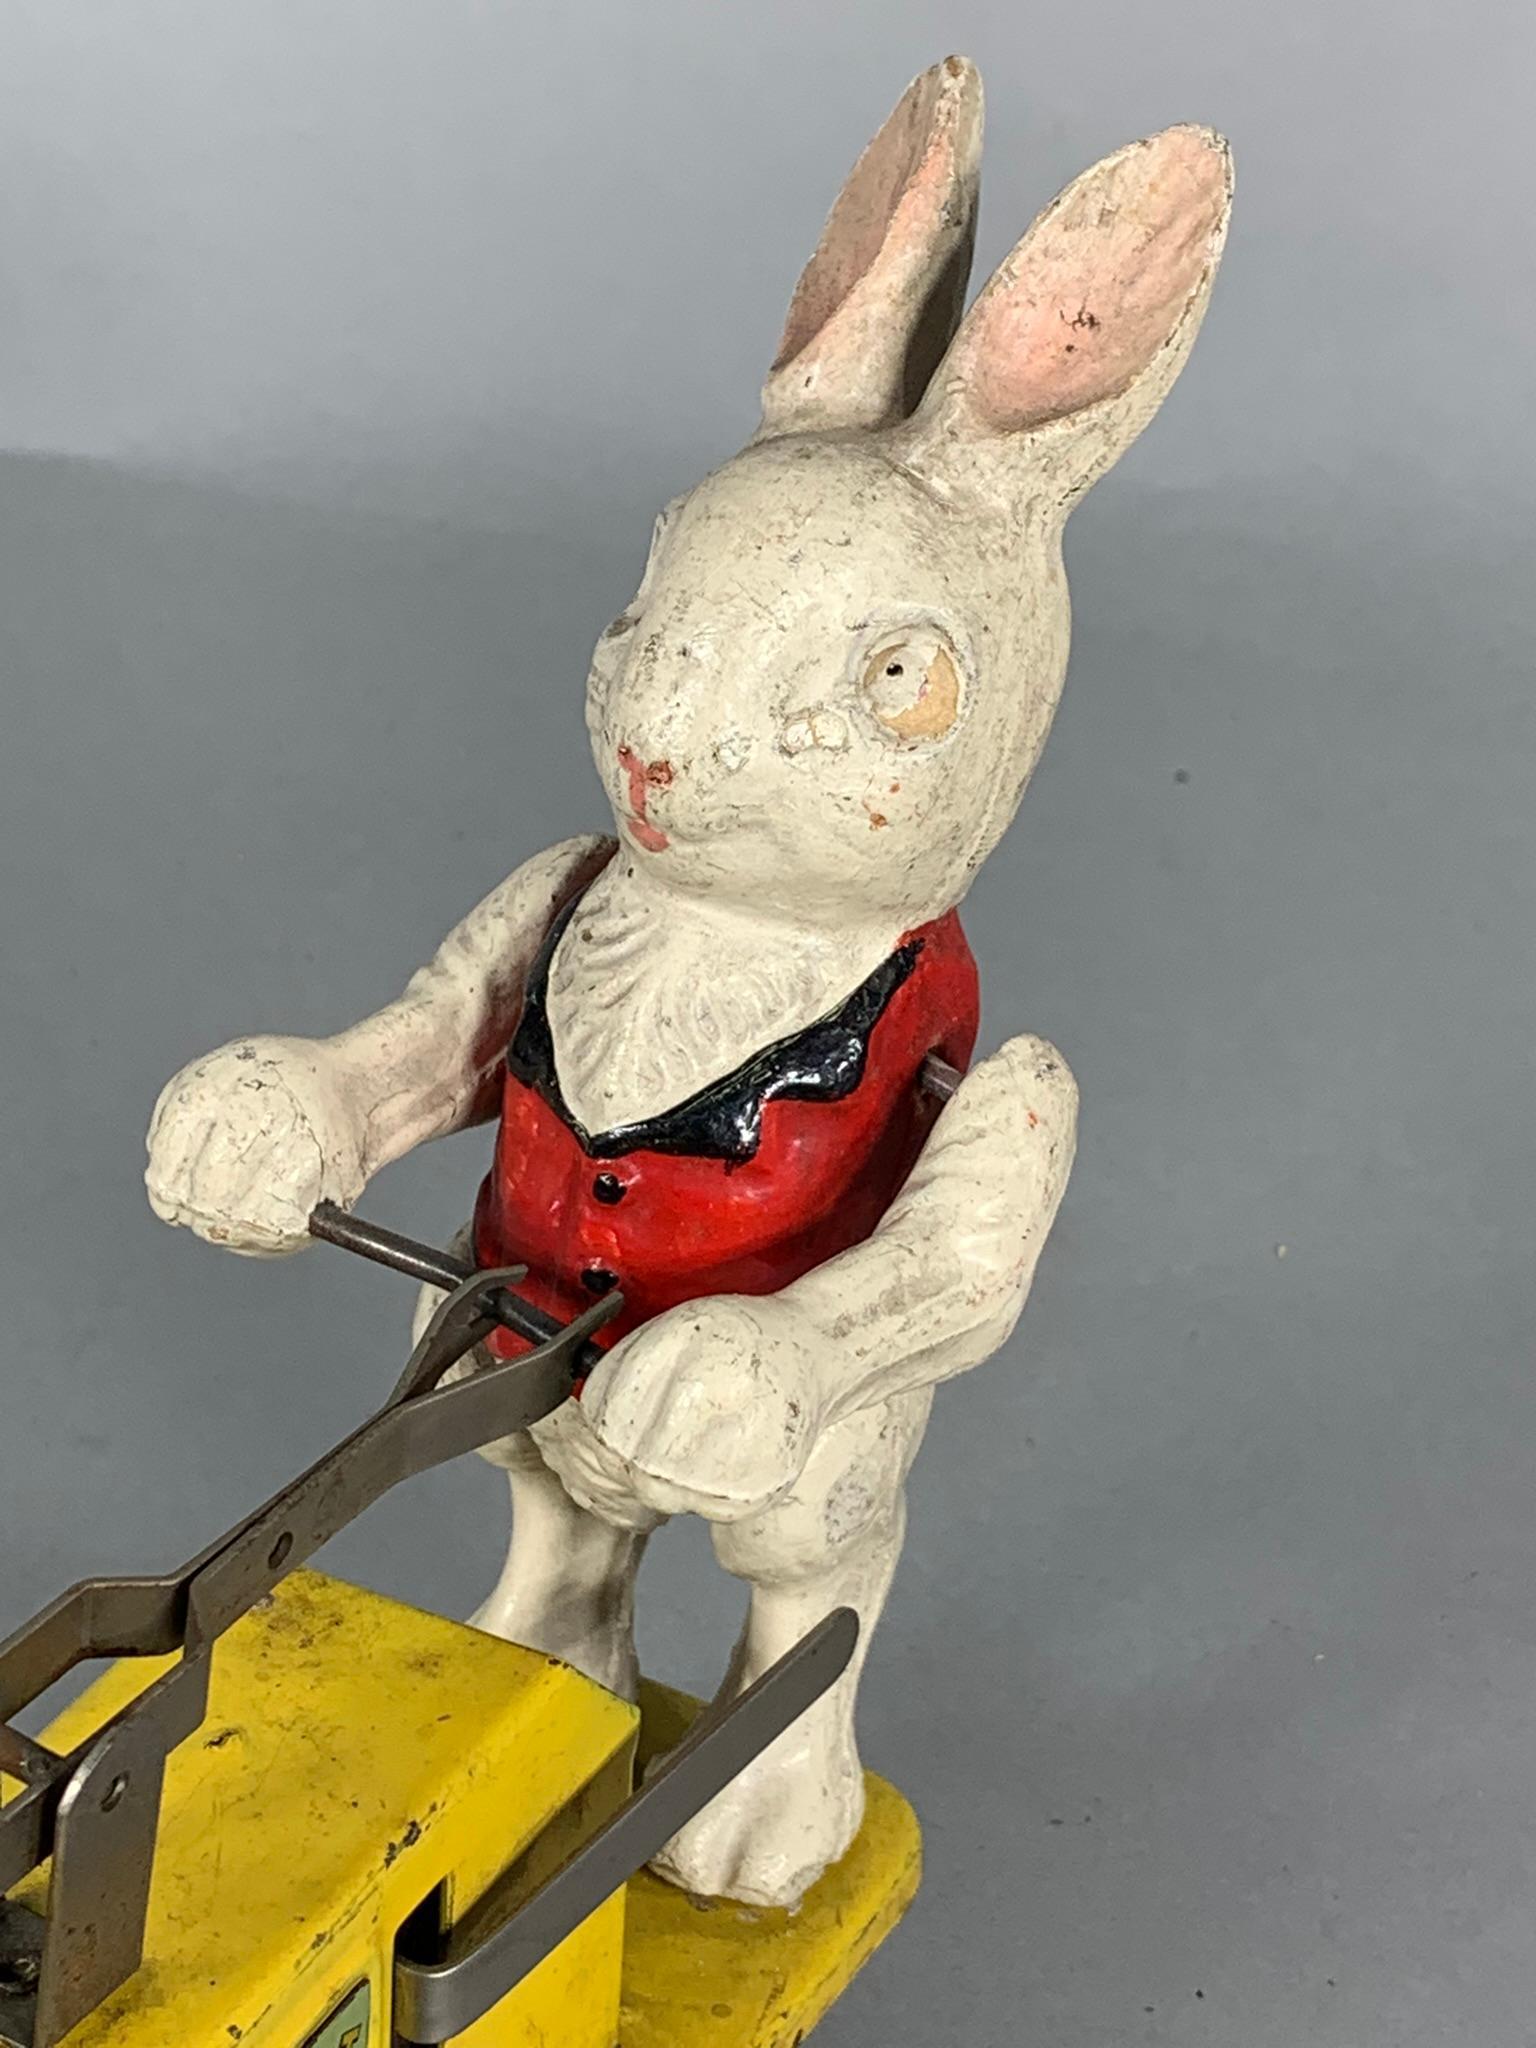 Lionel Pre-War Peter Rabbit Easter Bunny Hand Car with Flanged Wheels